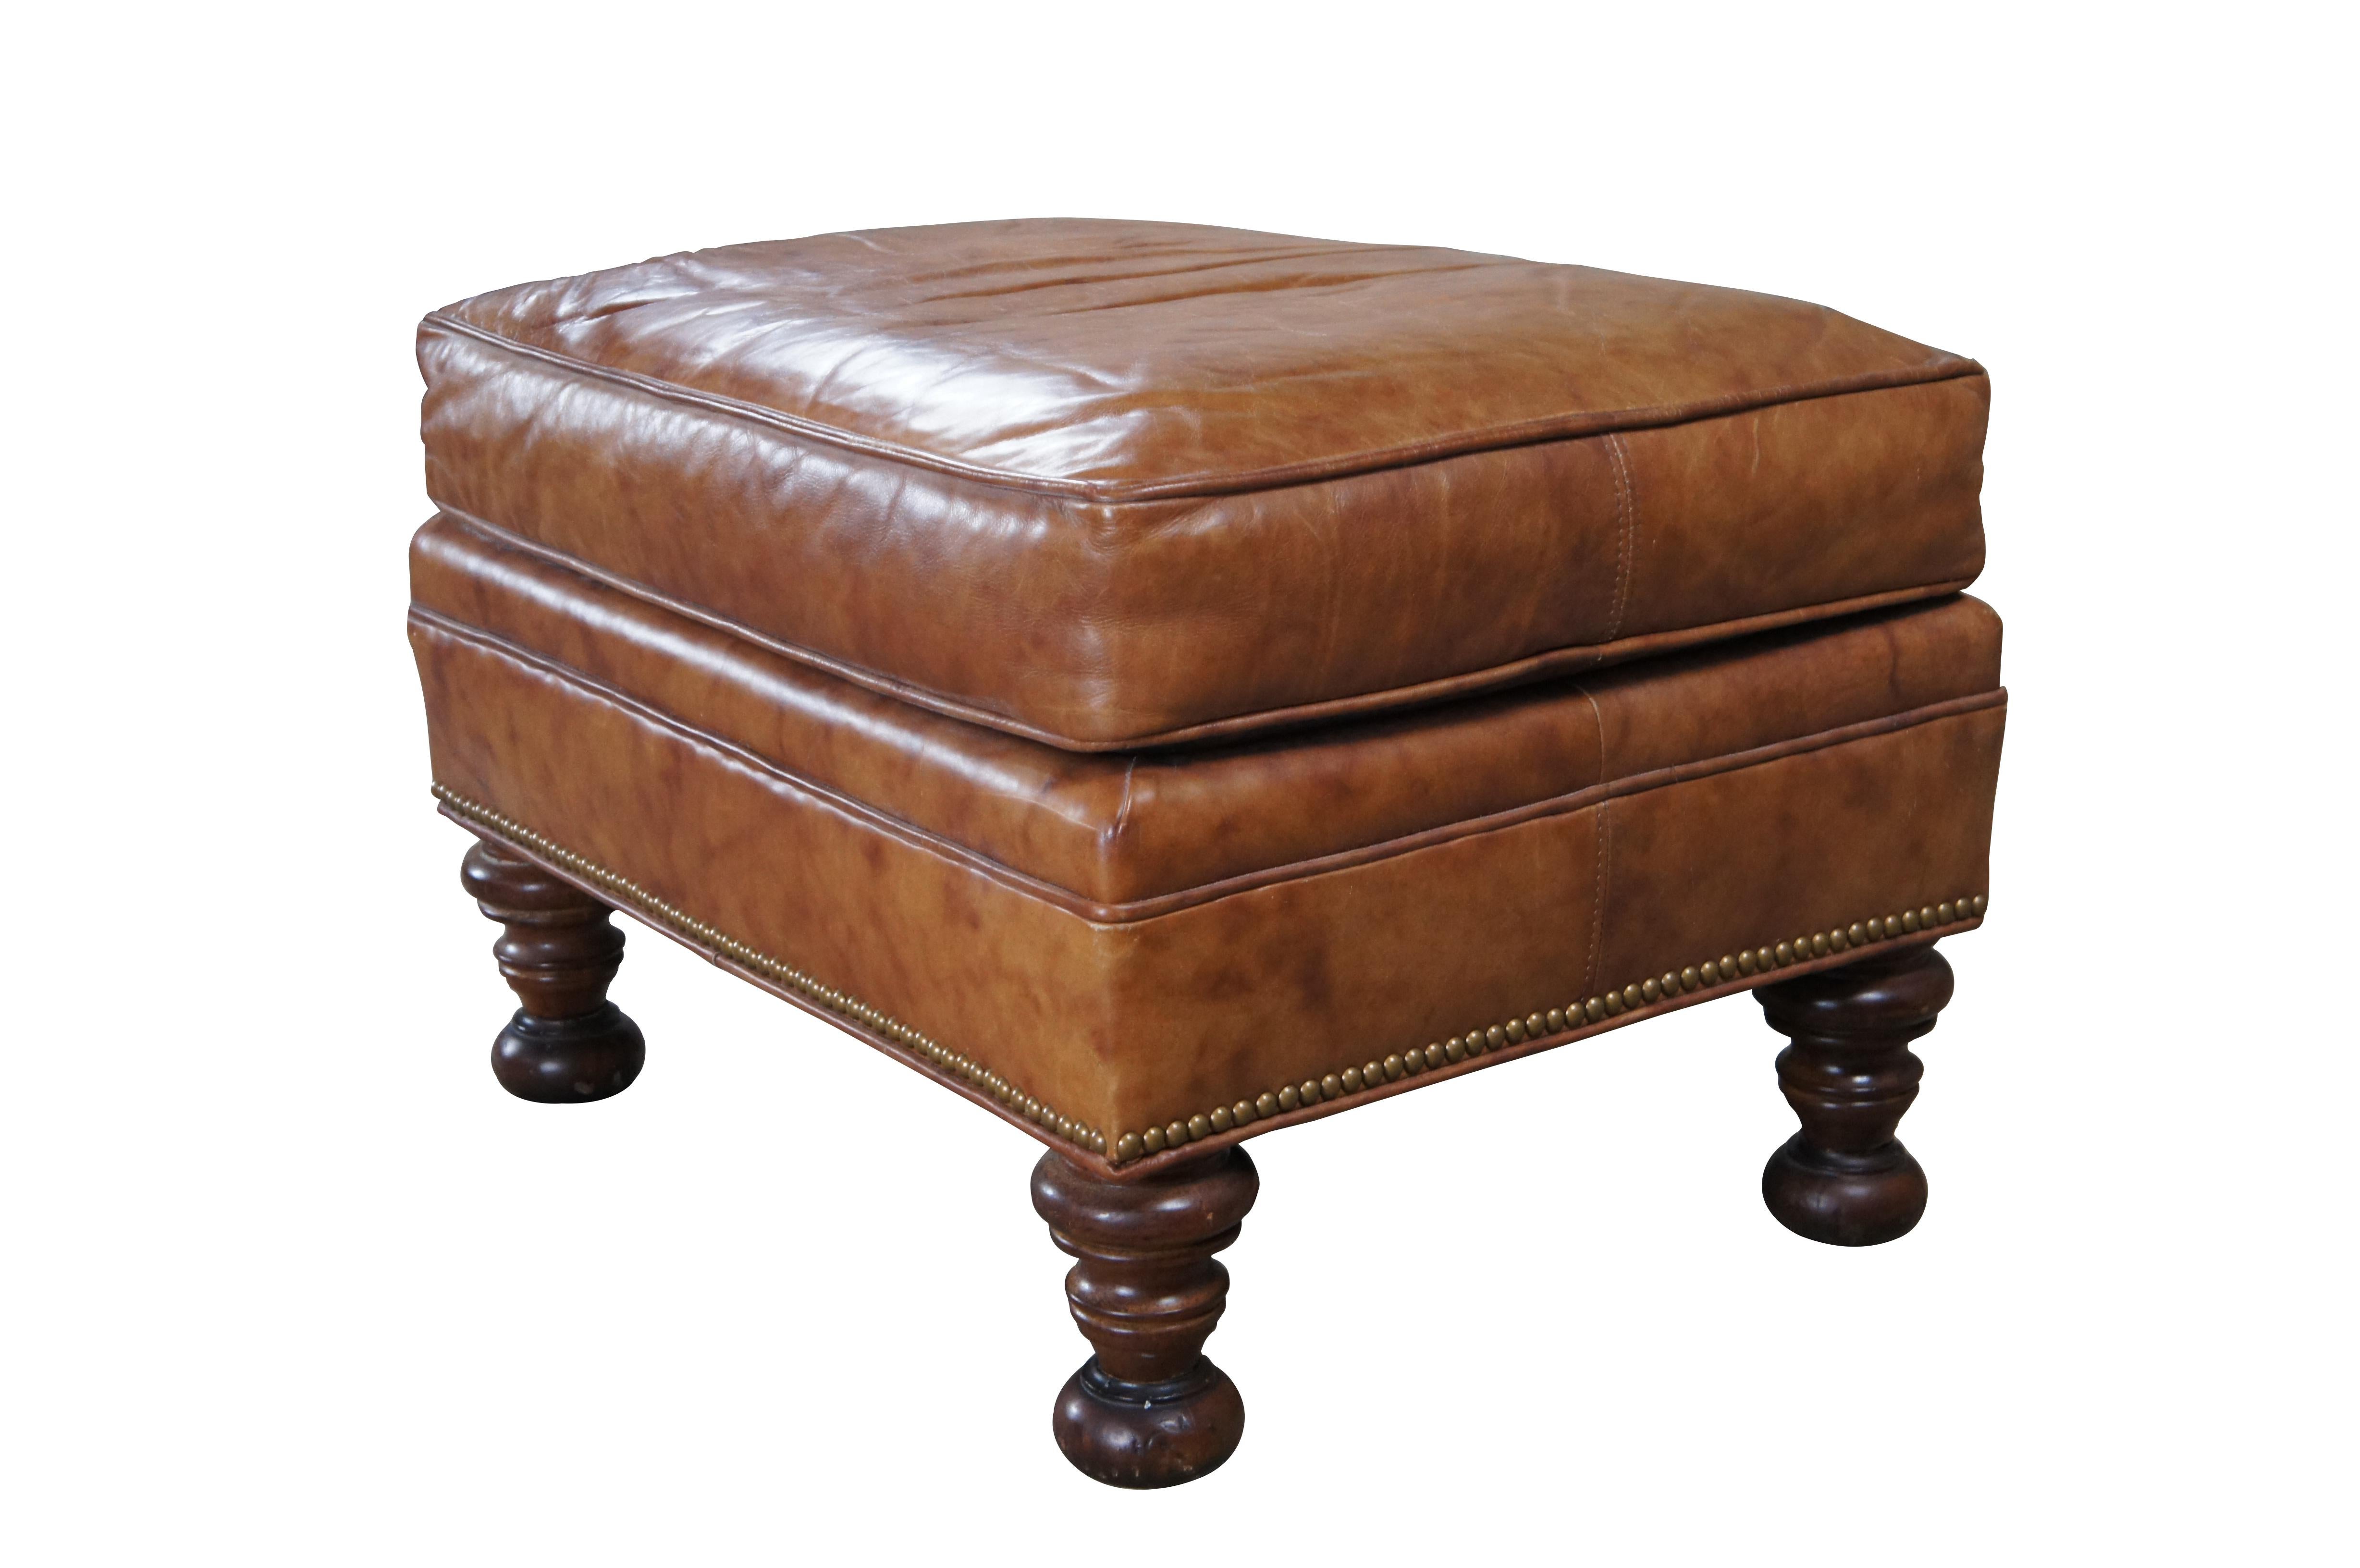 Late 20th Century leather upholstered ottoman or footstool by Wesley Hall. Features a rectangular frame with burnt orange leather, brass nailhead trim and turned mahogany feet. 

Wesley Hall is a family-owned furniture manufacturer that has been in